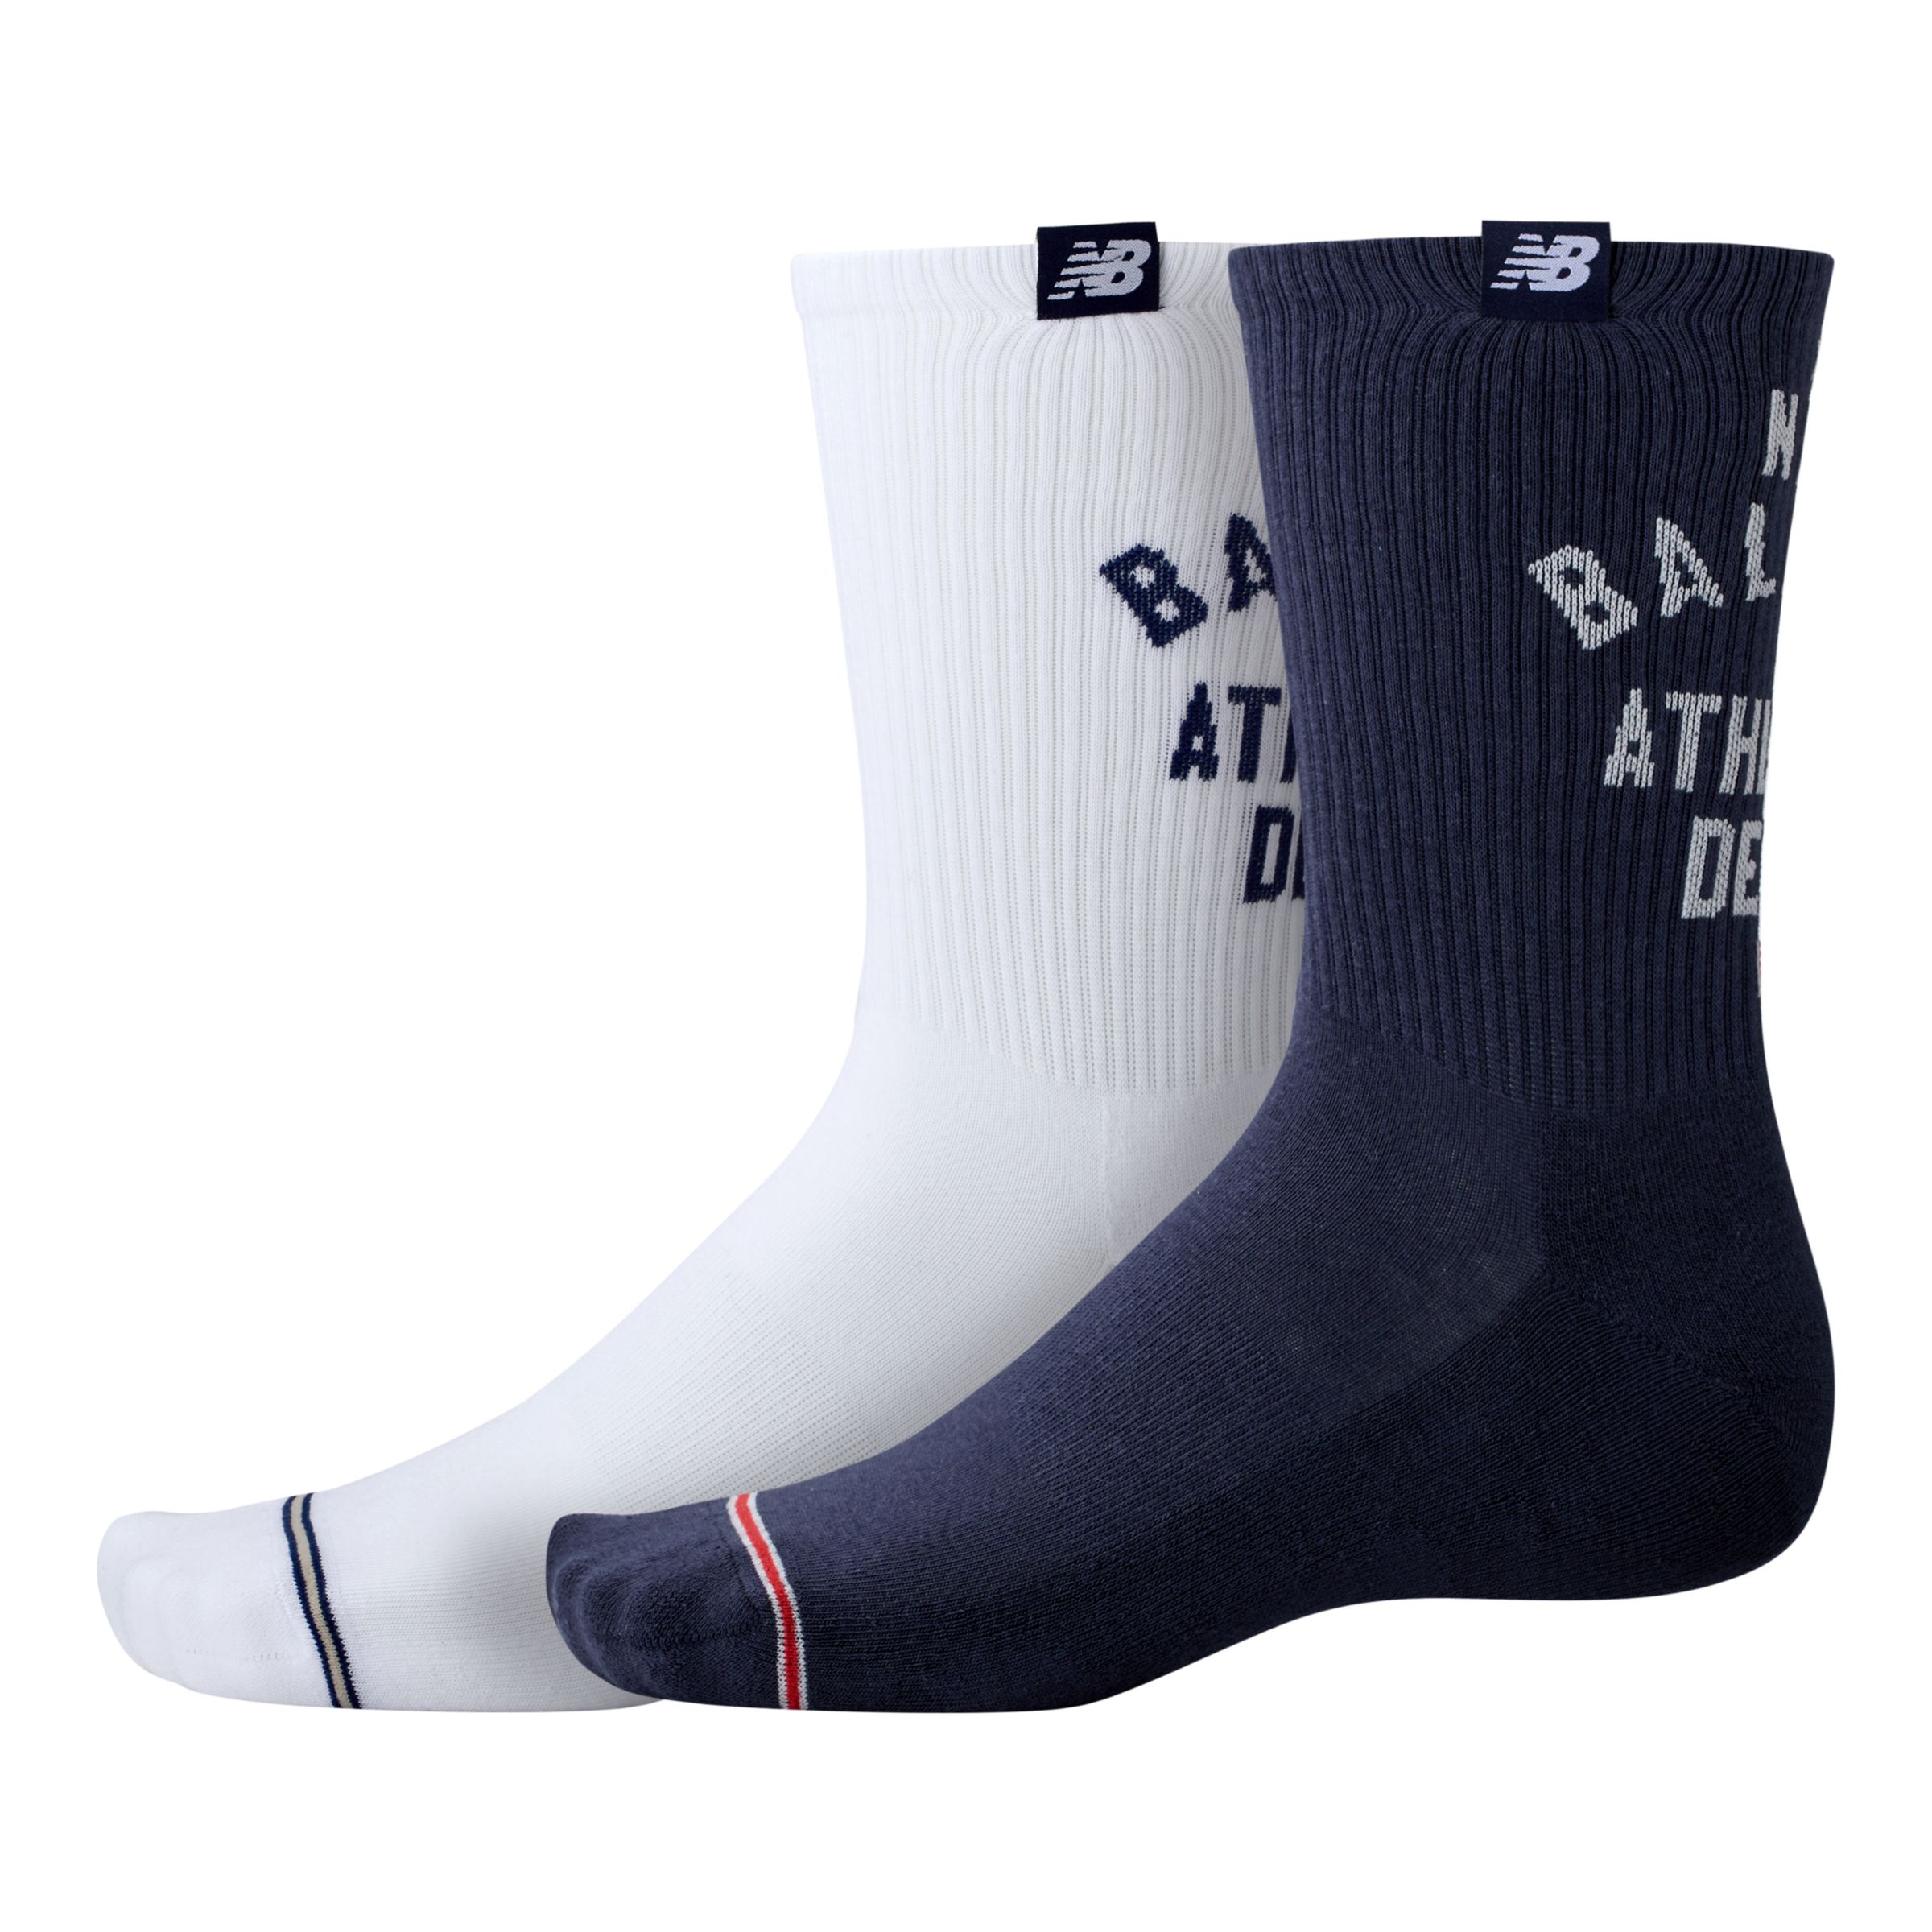 New Balance Unisex Lifestyle Midcalf Socks 2 Pack In Print/pattern/misc